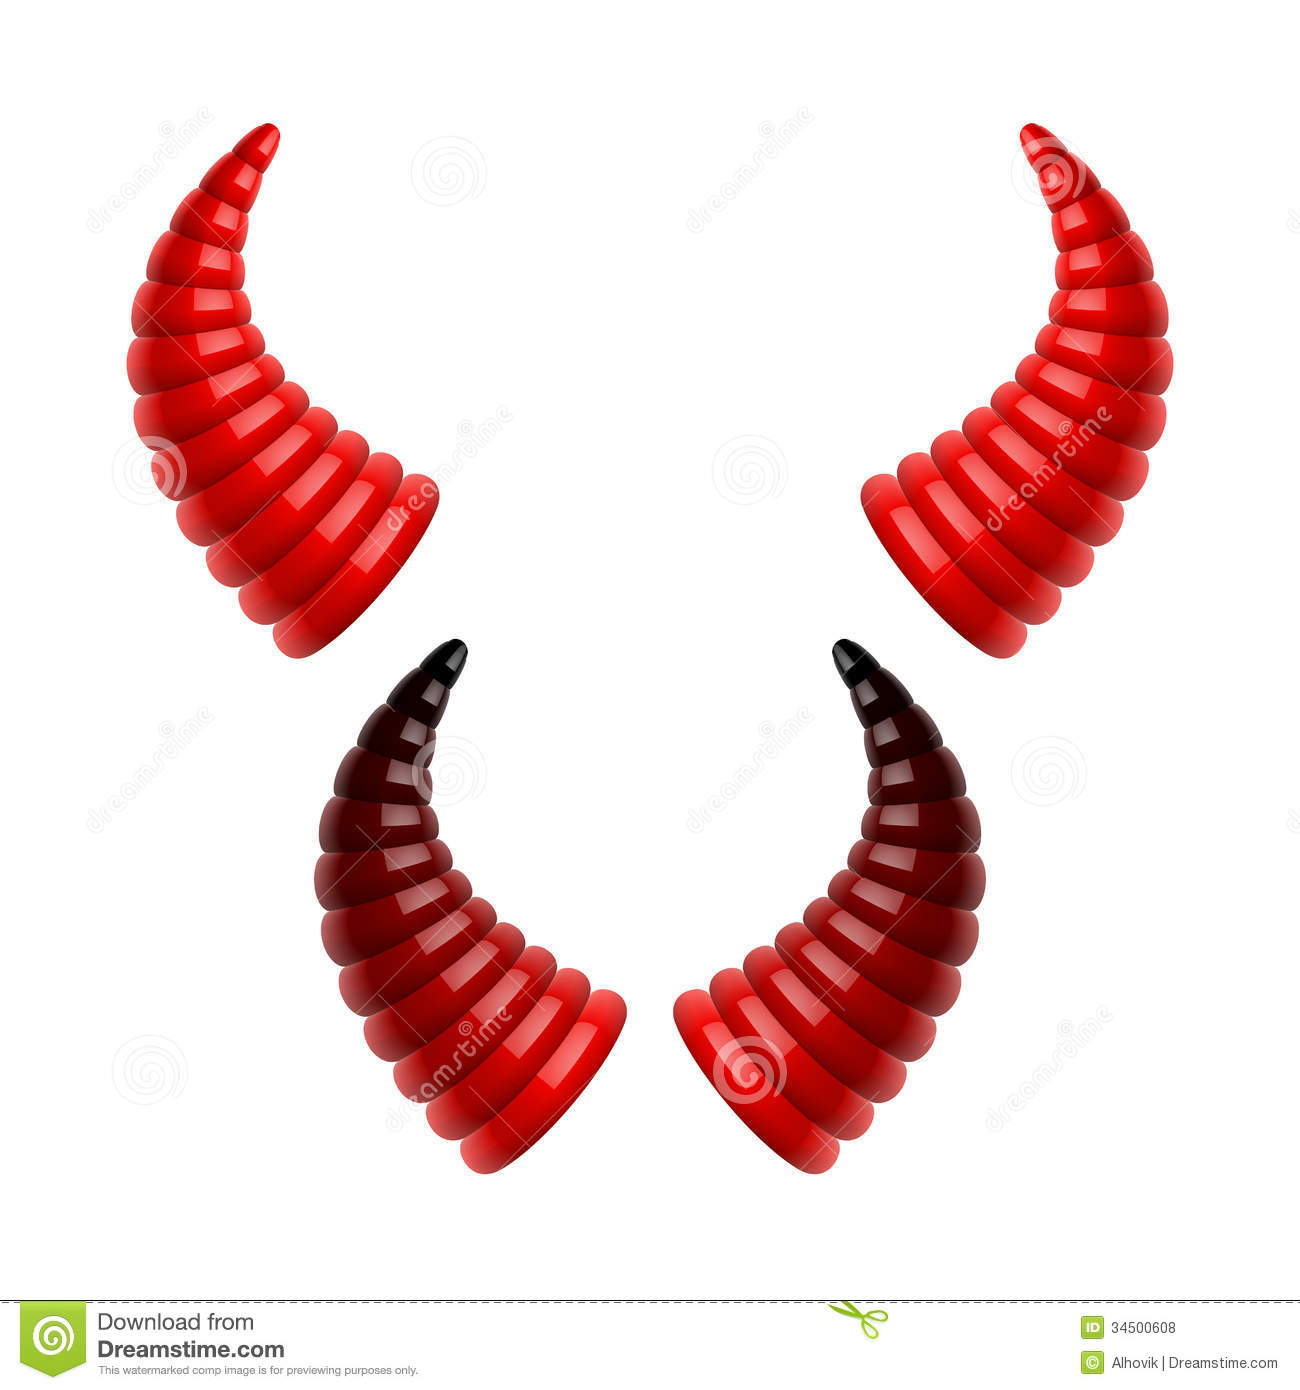 Devils Horns Royalty Free Stock Photos   Image  34500608